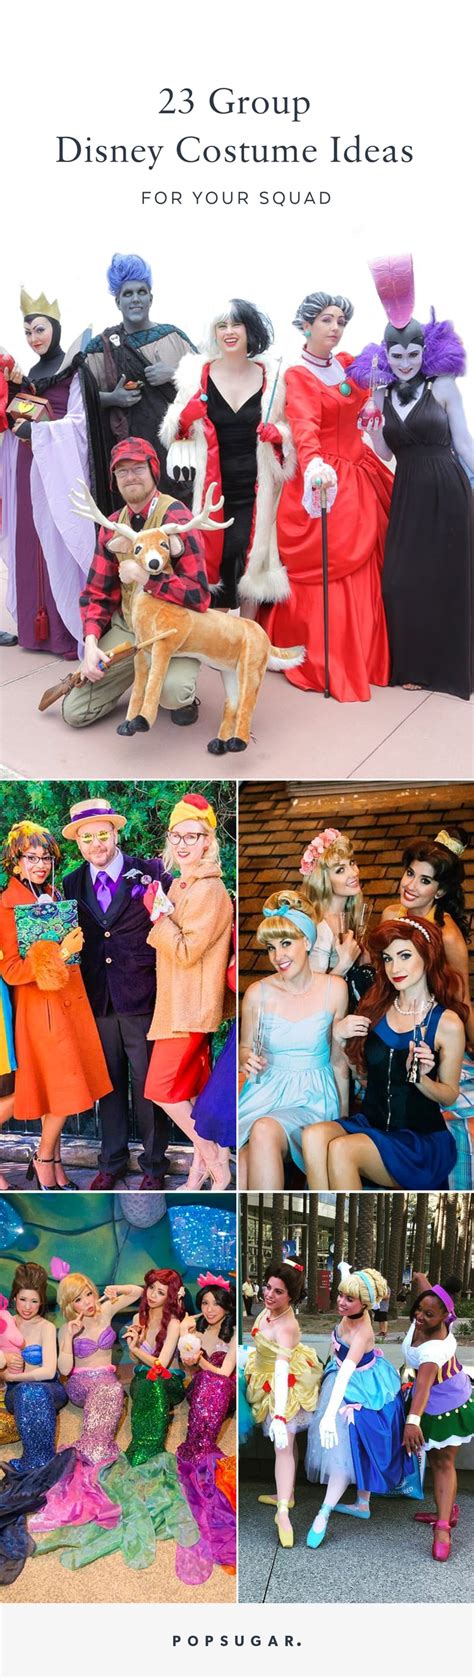 Pin It Disney Costume Ideas For Groups Popsugar Love And Sex Photo 24